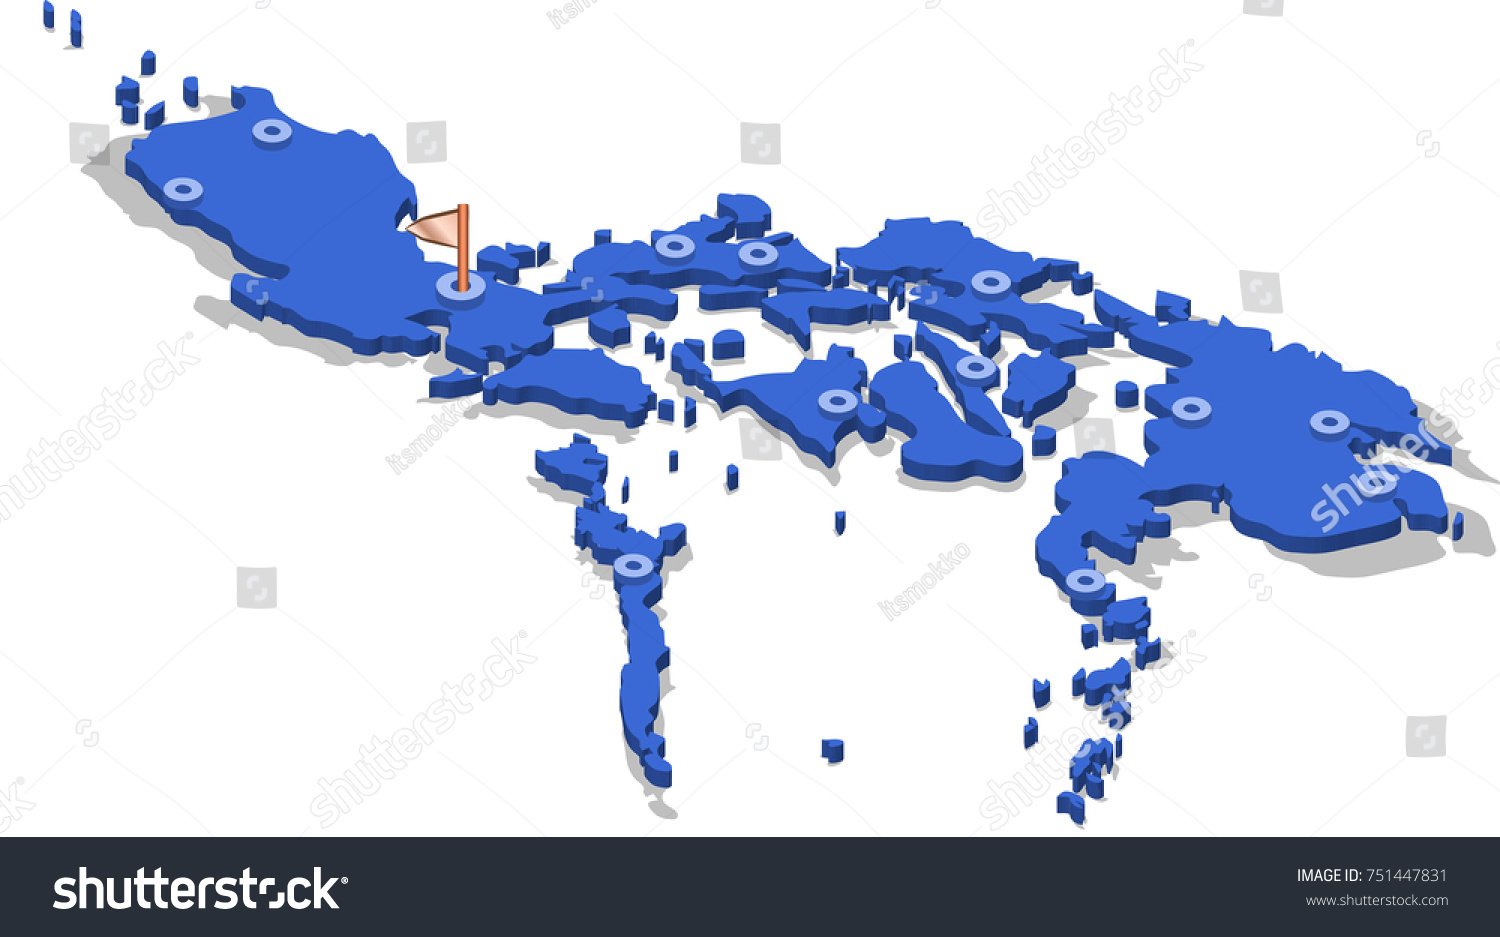 3d isometric view map philippines blue stock vector royalty free 751447831 https www shutterstock com image vector 3d isometric view map philippines blue 751447831